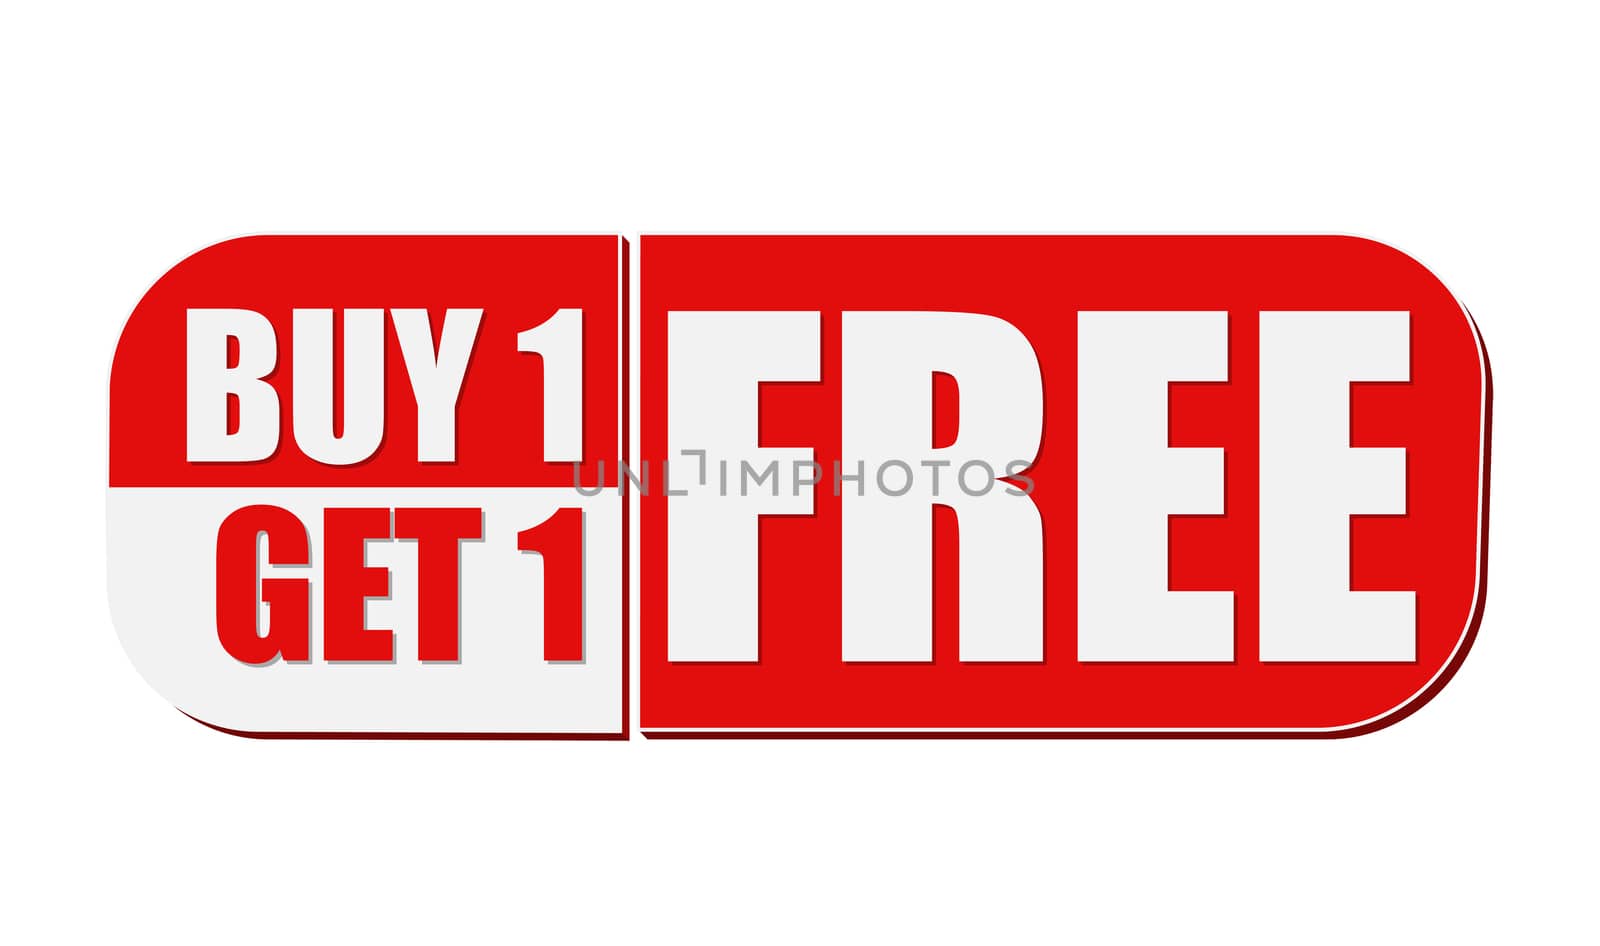 buy one get one free, white and red flat design label by marinini